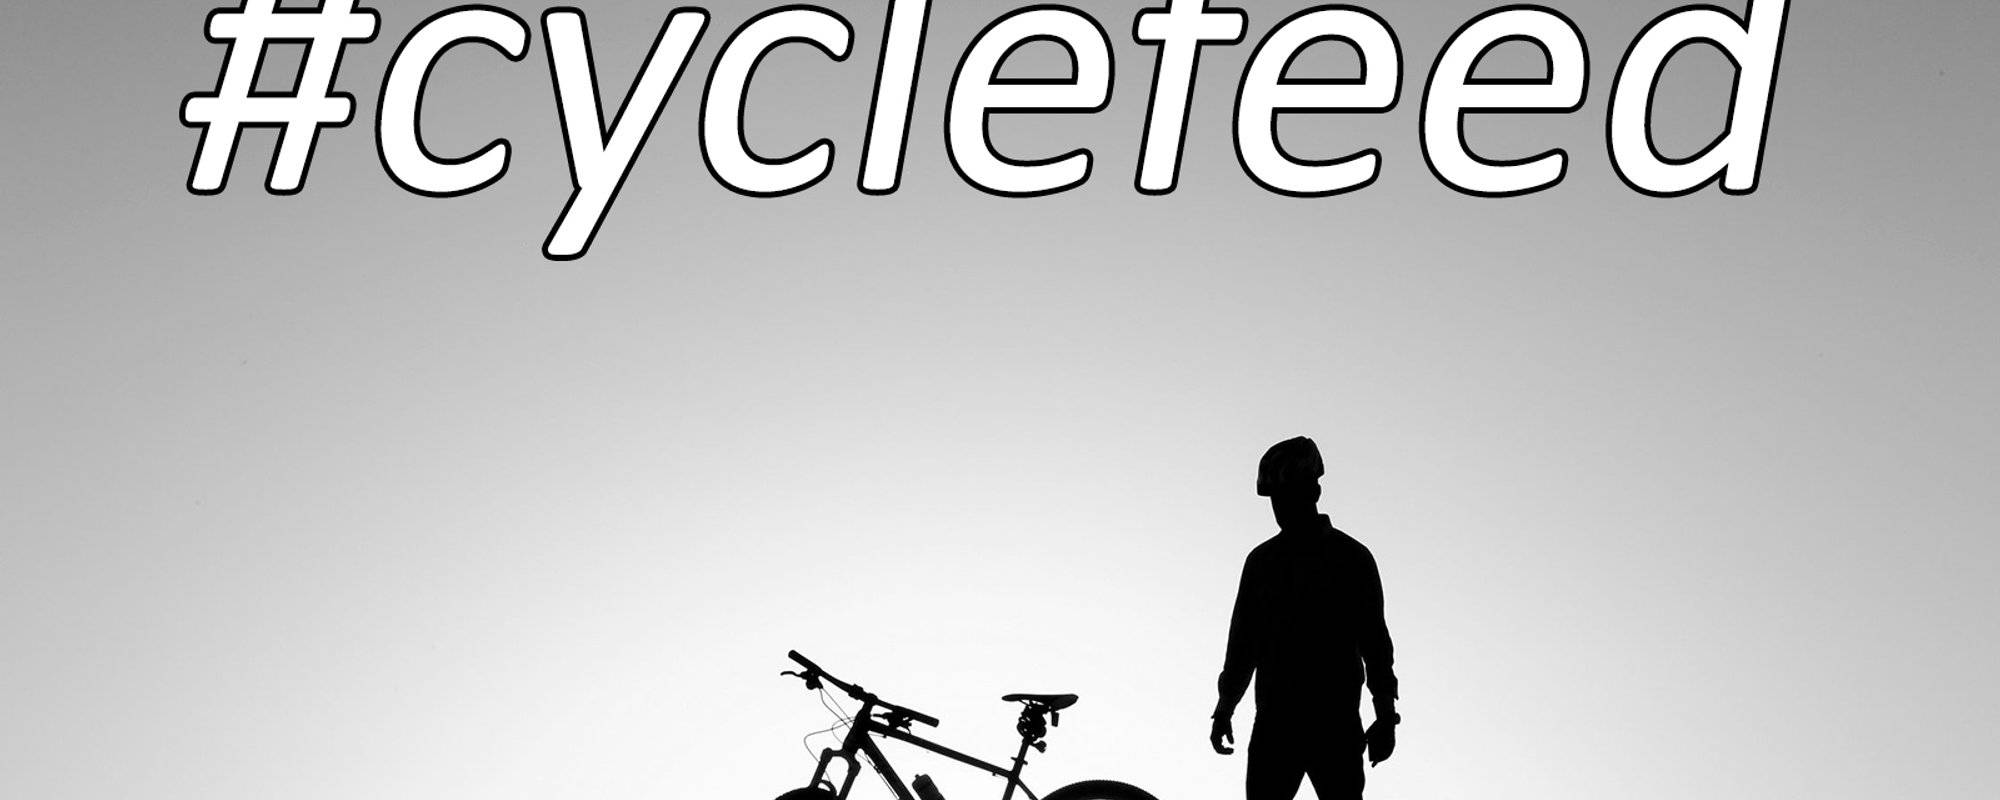 How to Participate: Use #cyclefeed in your Posts!